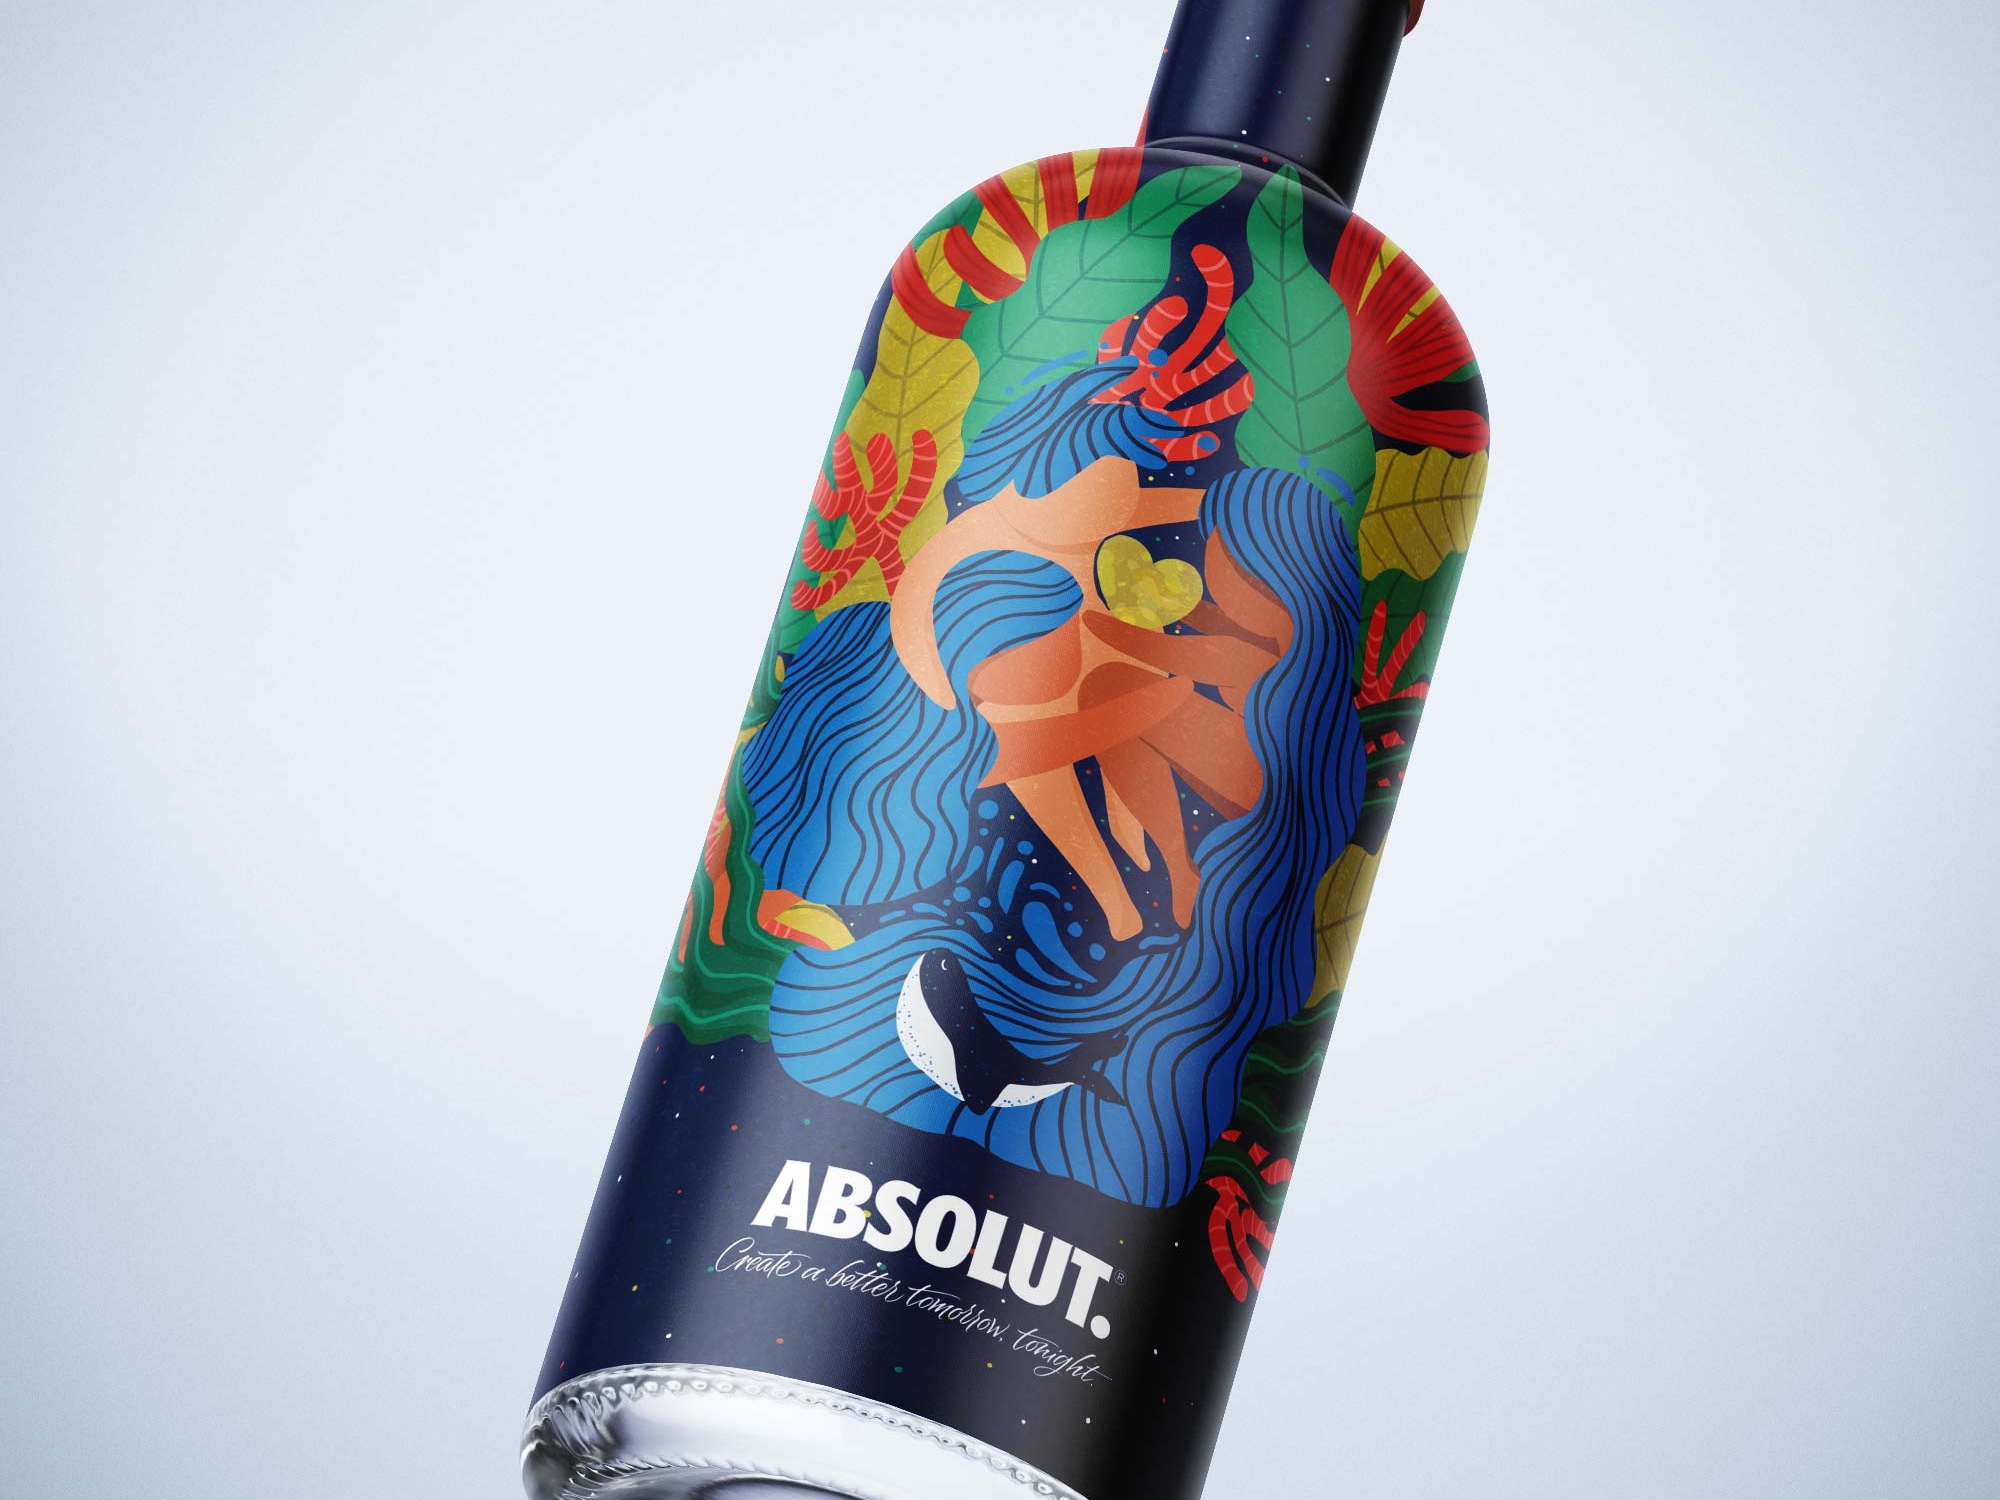 Packaging - Absolut Vodka by Archana Rajagopal on Dribbble